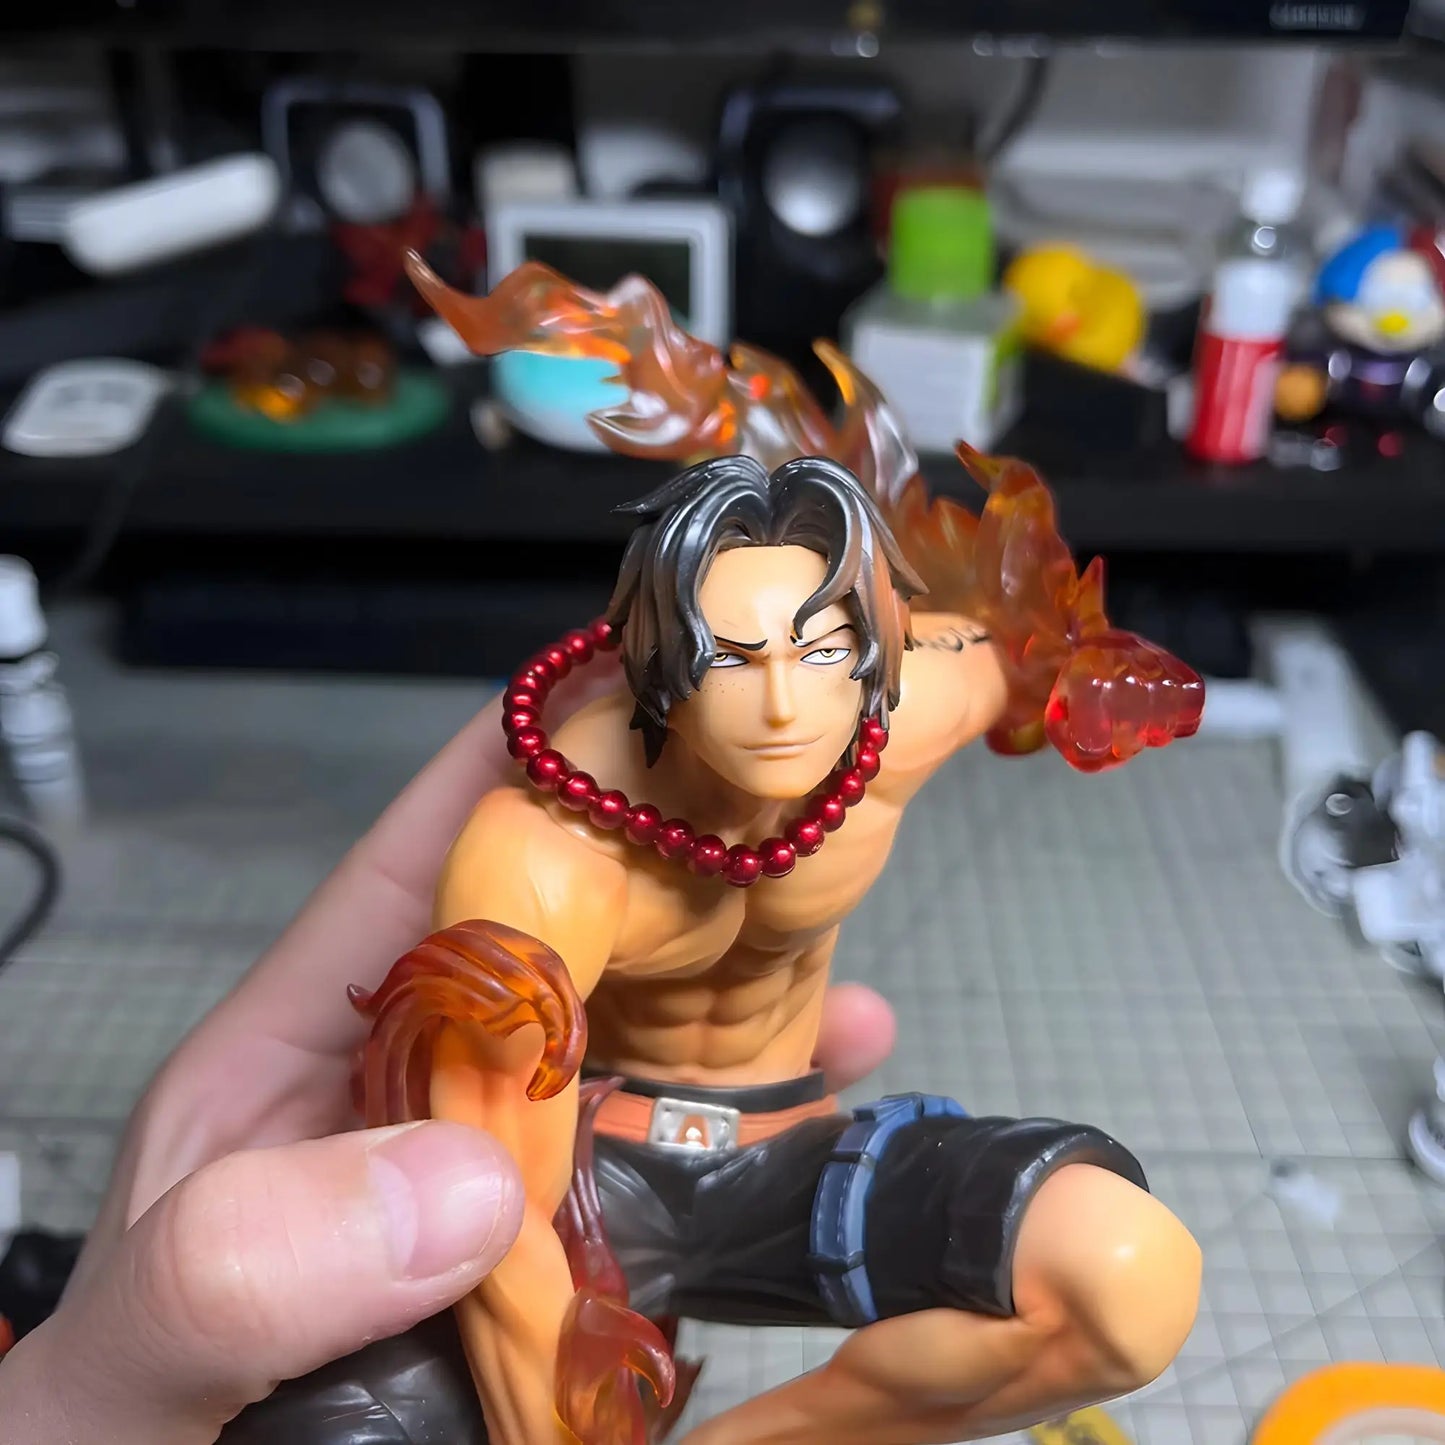 16CM One Piece GK Portgas D Ace Figure Anime Toys Collectible Figurines Model Squatting Fire Fist Ace Ornaments Gifts For Animer